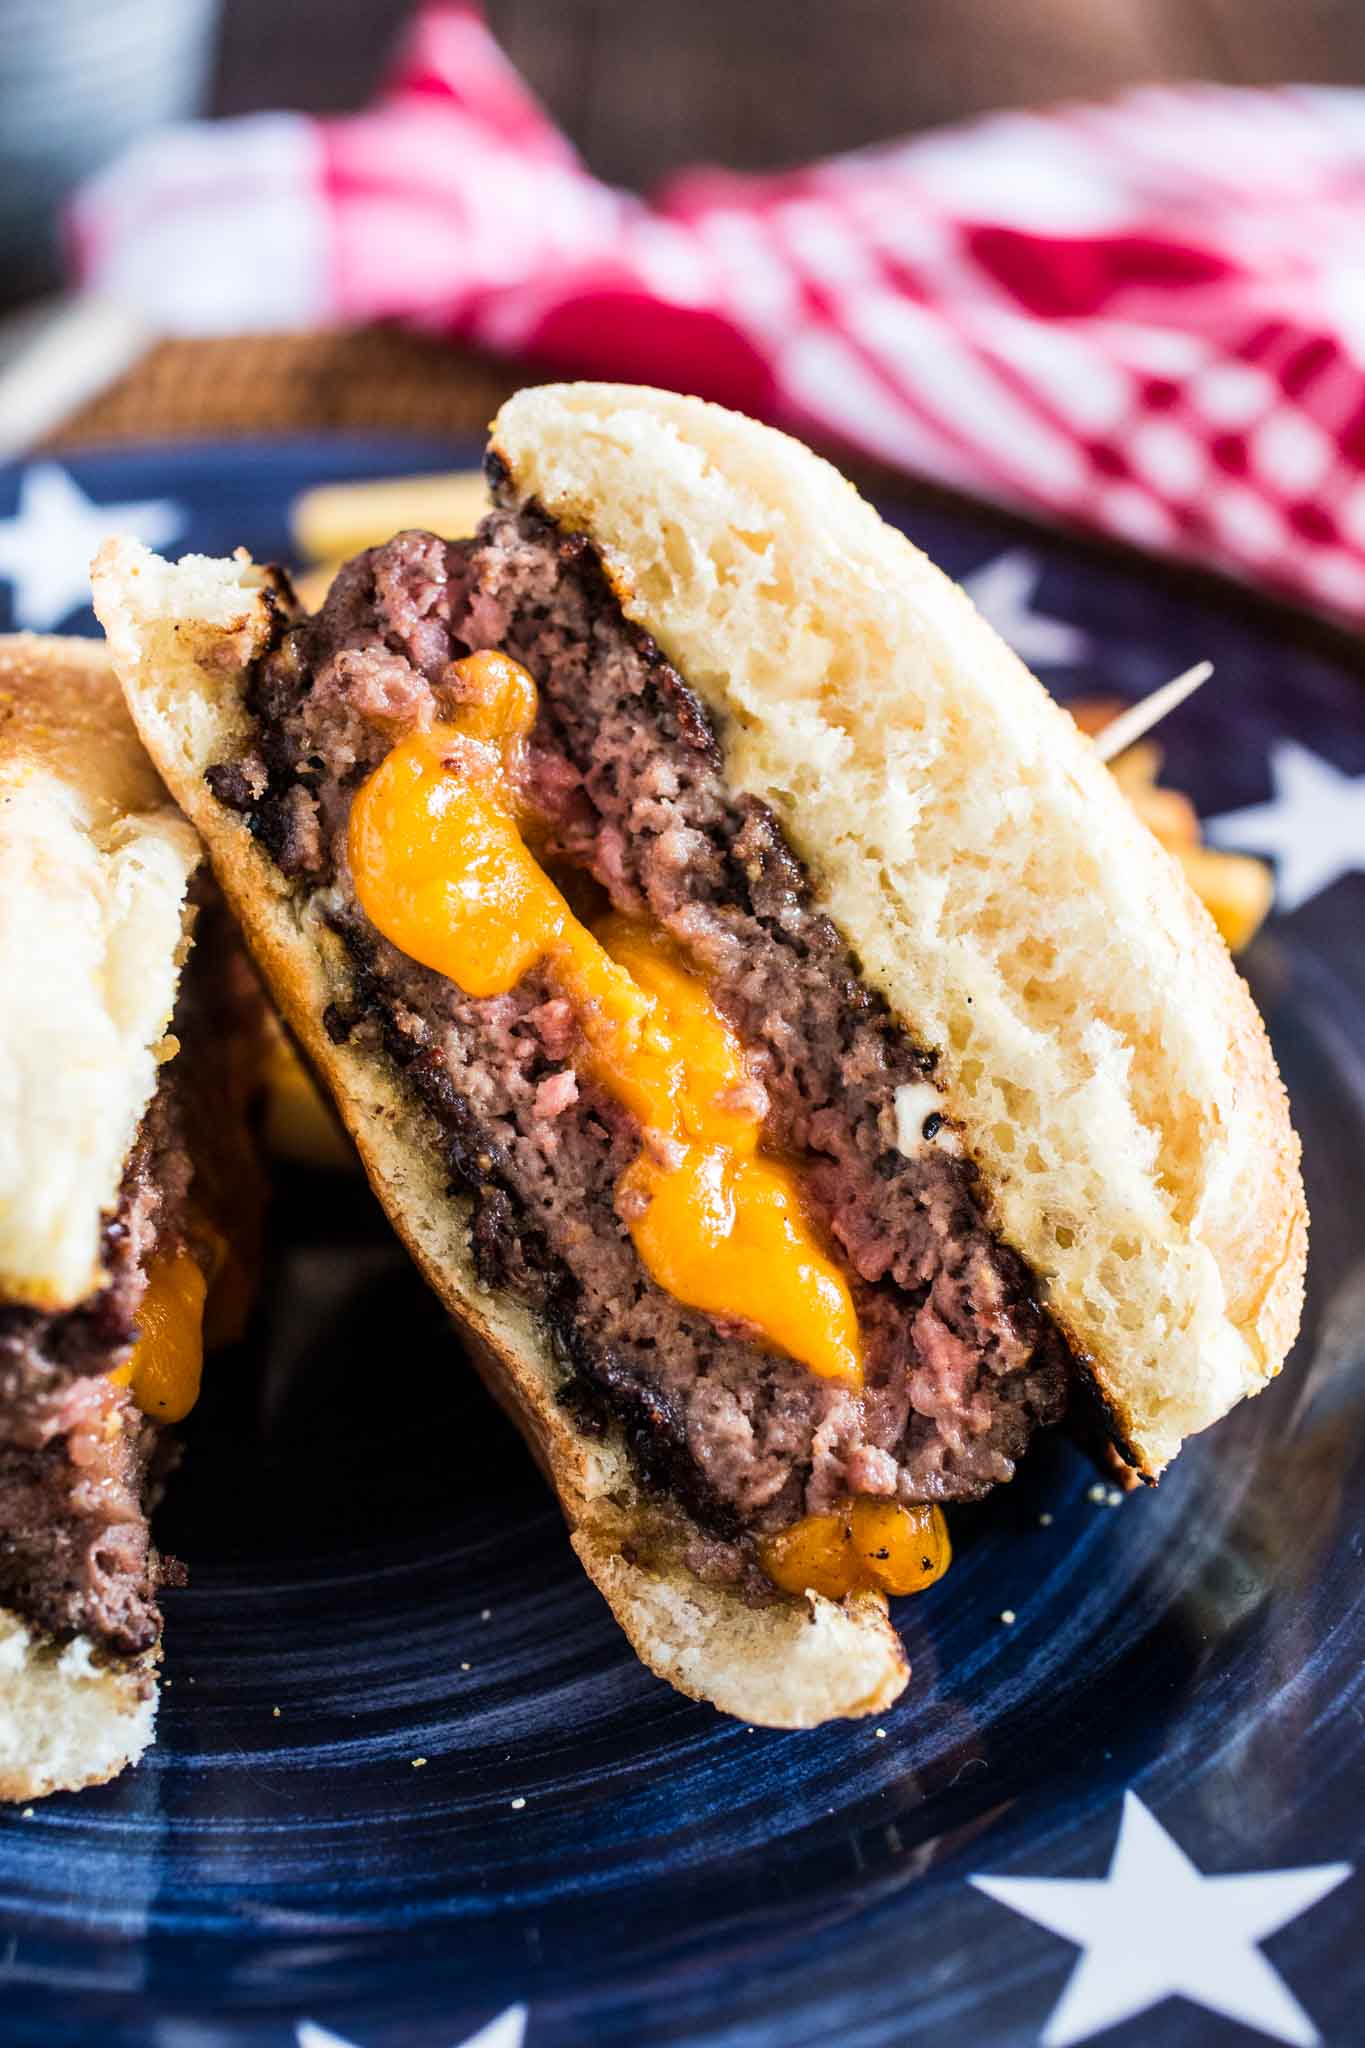 Juicy Lucy Burger | www.oliviascuisine.com | An iconic Minneapolis burger, stuffed with lots of cheese!